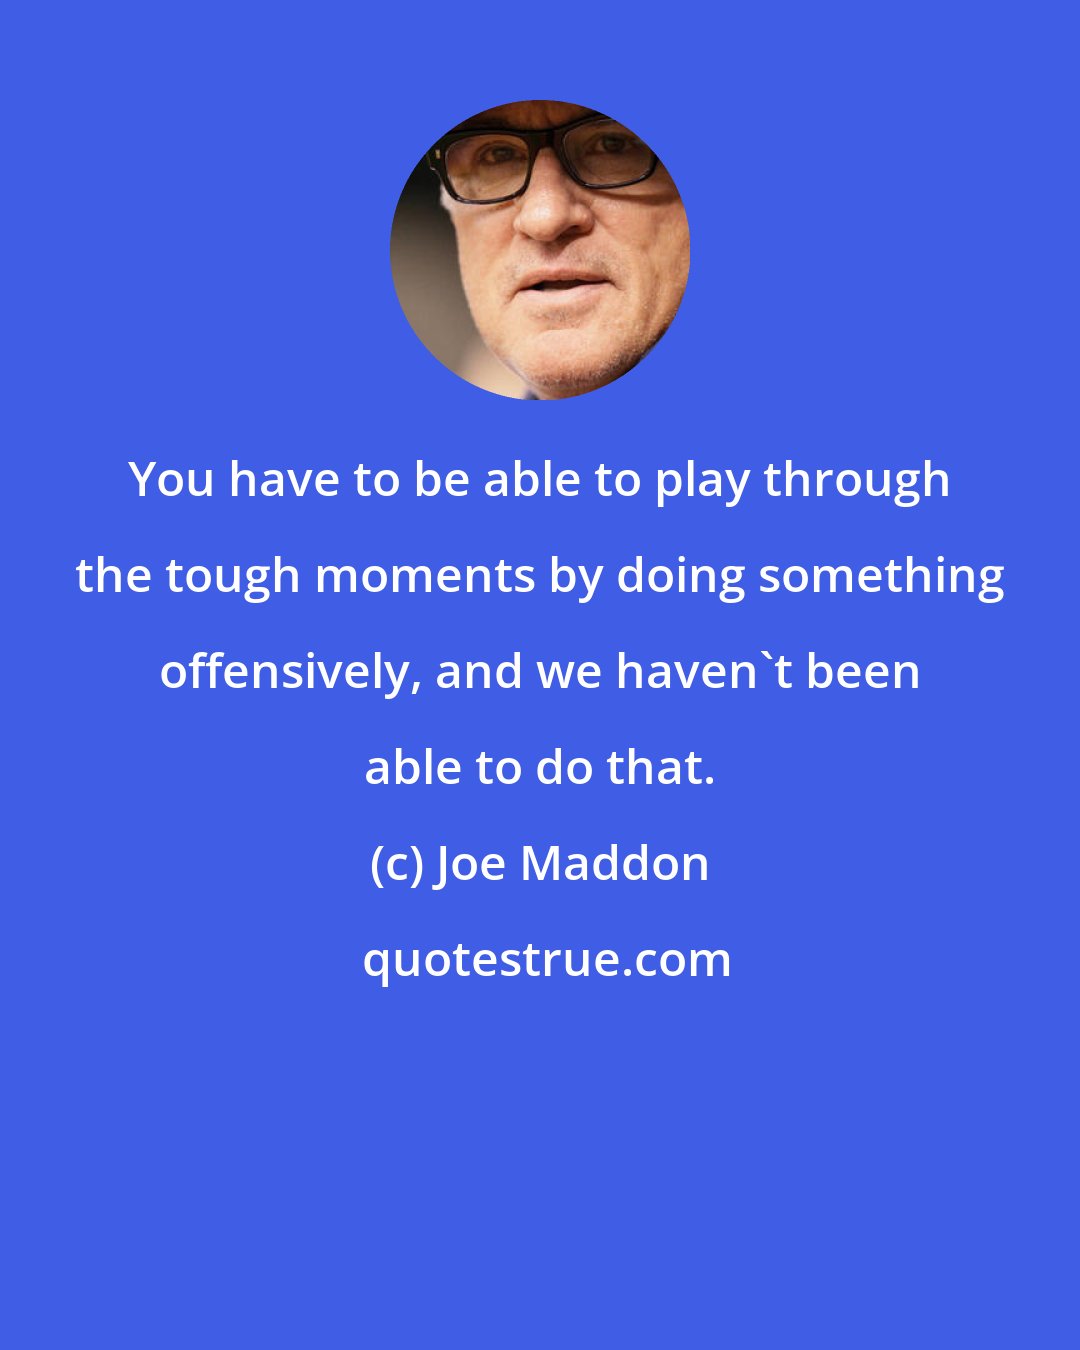 Joe Maddon: You have to be able to play through the tough moments by doing something offensively, and we haven't been able to do that.